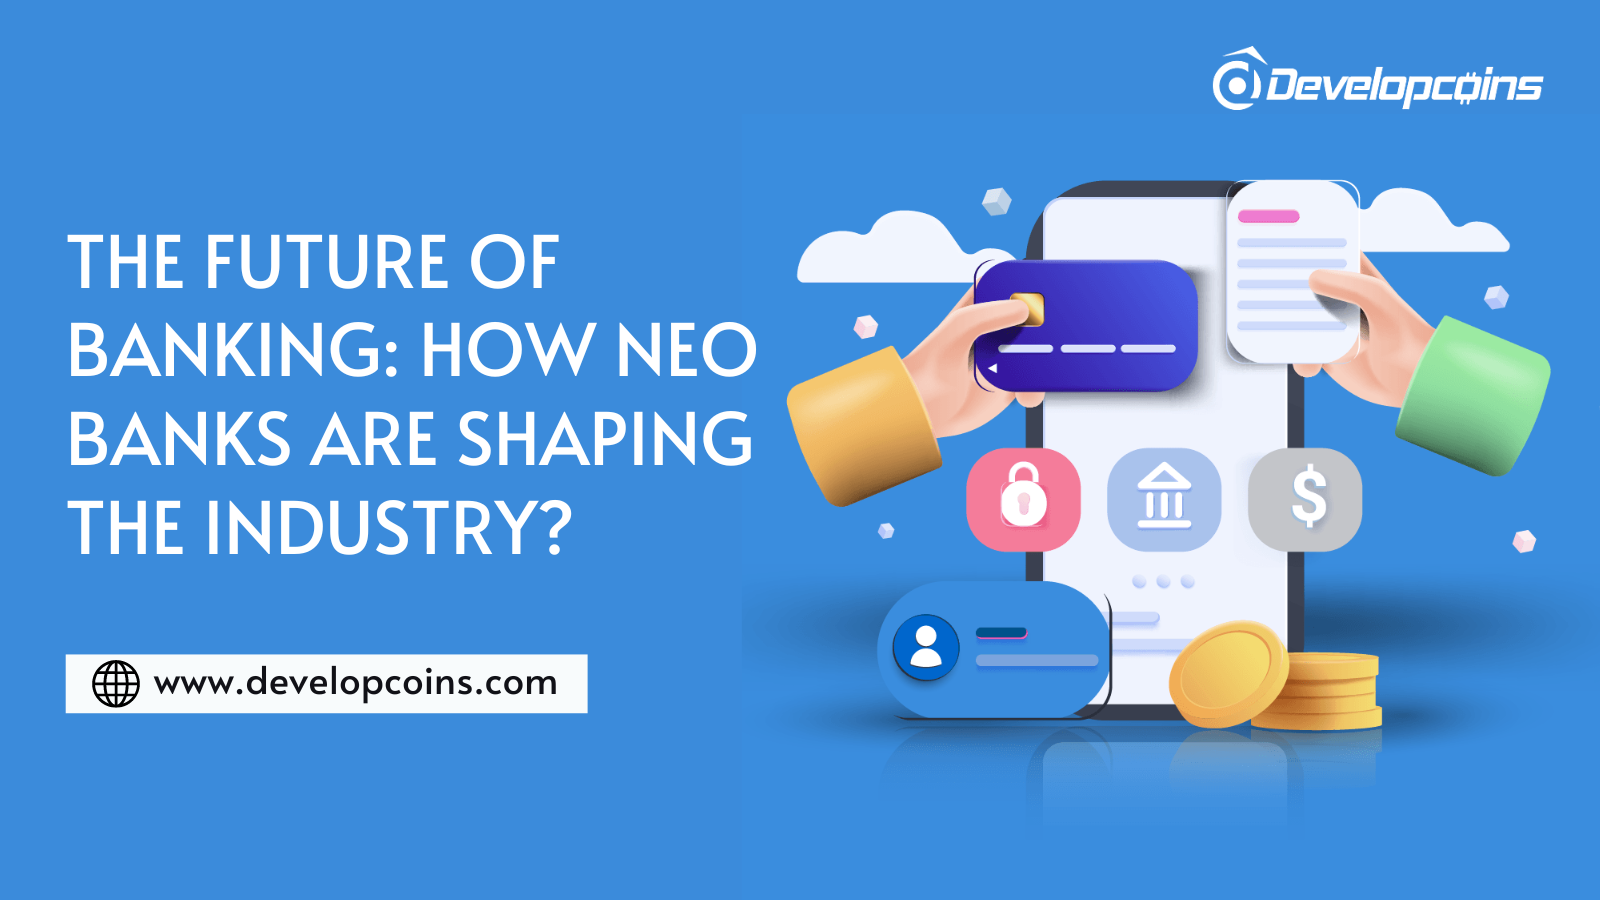 The Future of Banking: How NEO Banks are Shaping the Industry?